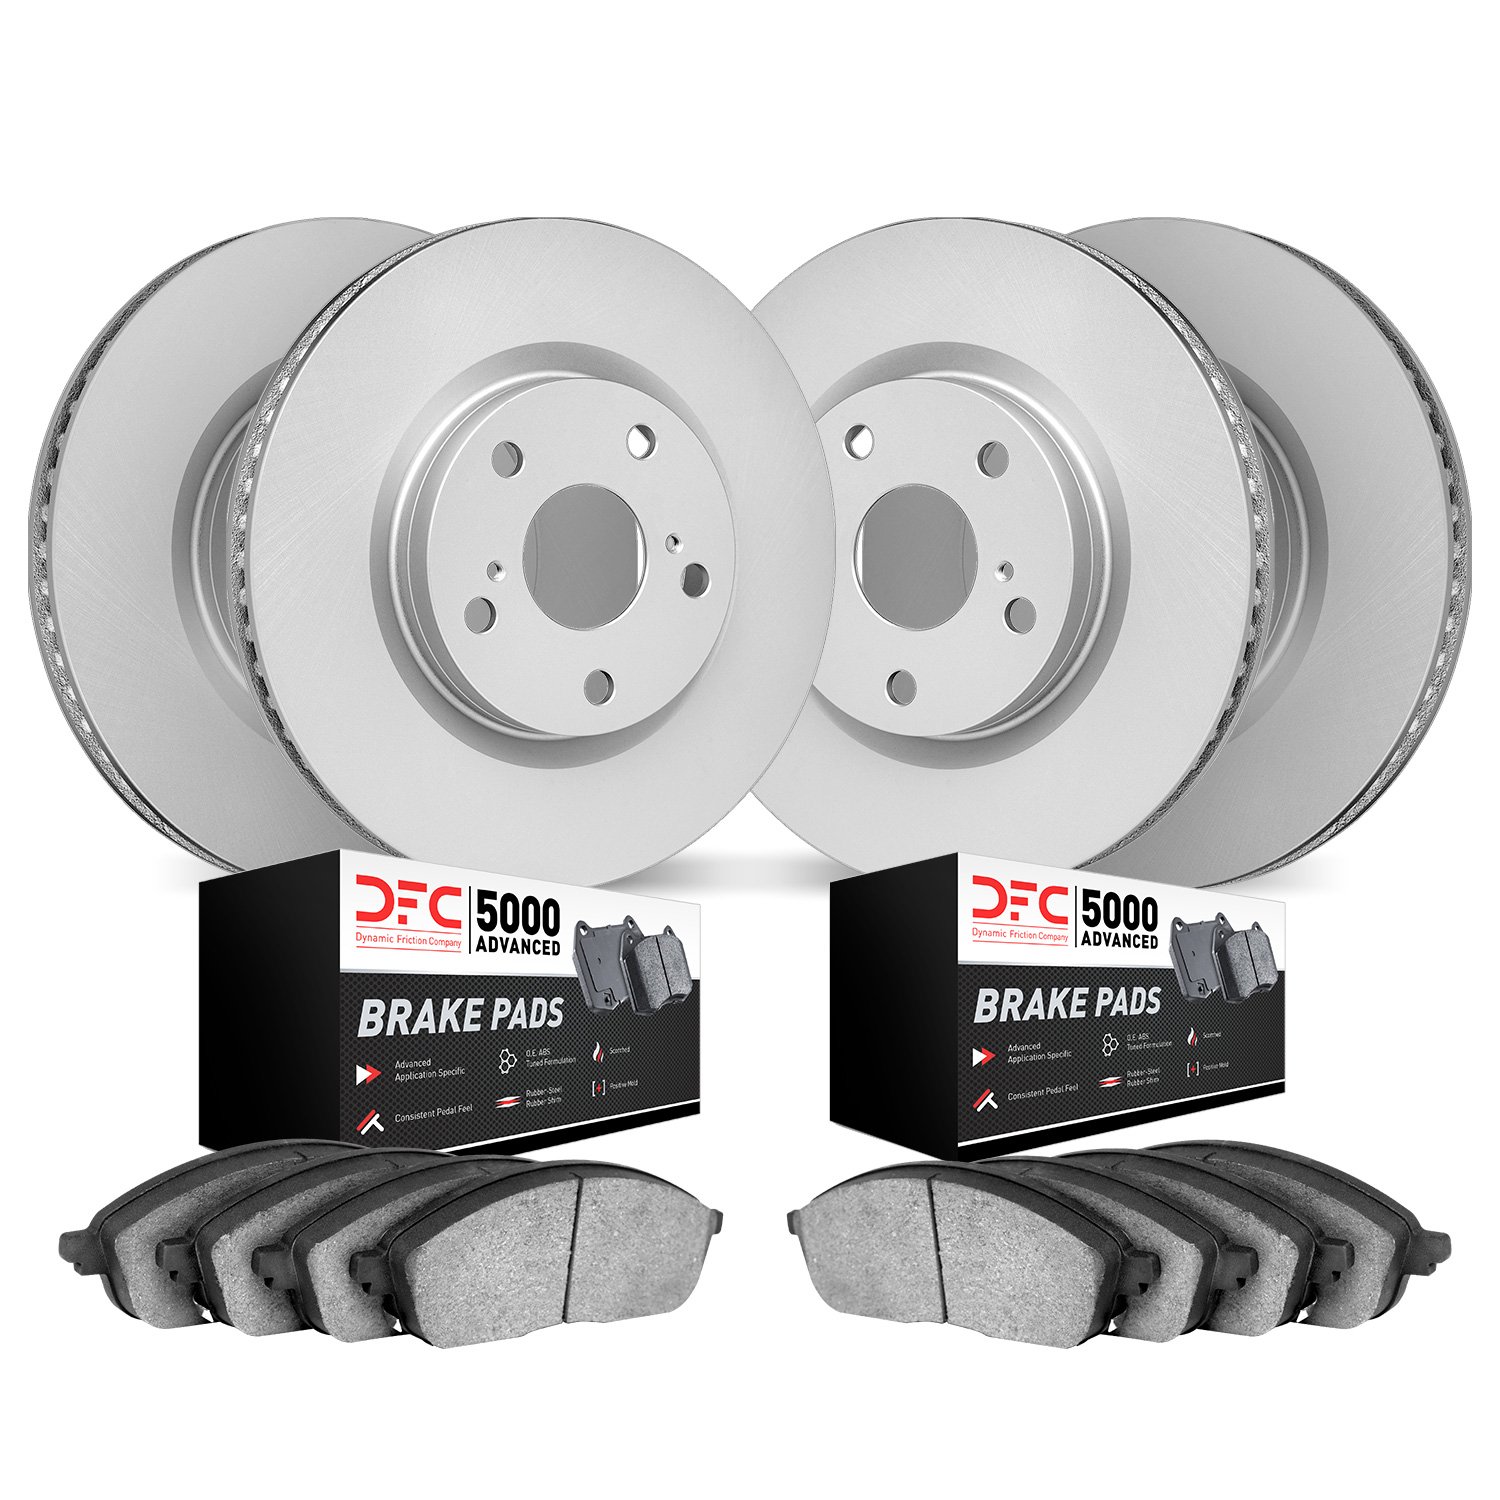 4504-63058 Geospec Brake Rotors w/5000 Advanced Brake Pads Kit, 2017-2019 Mercedes-Benz, Position: Front and Rear